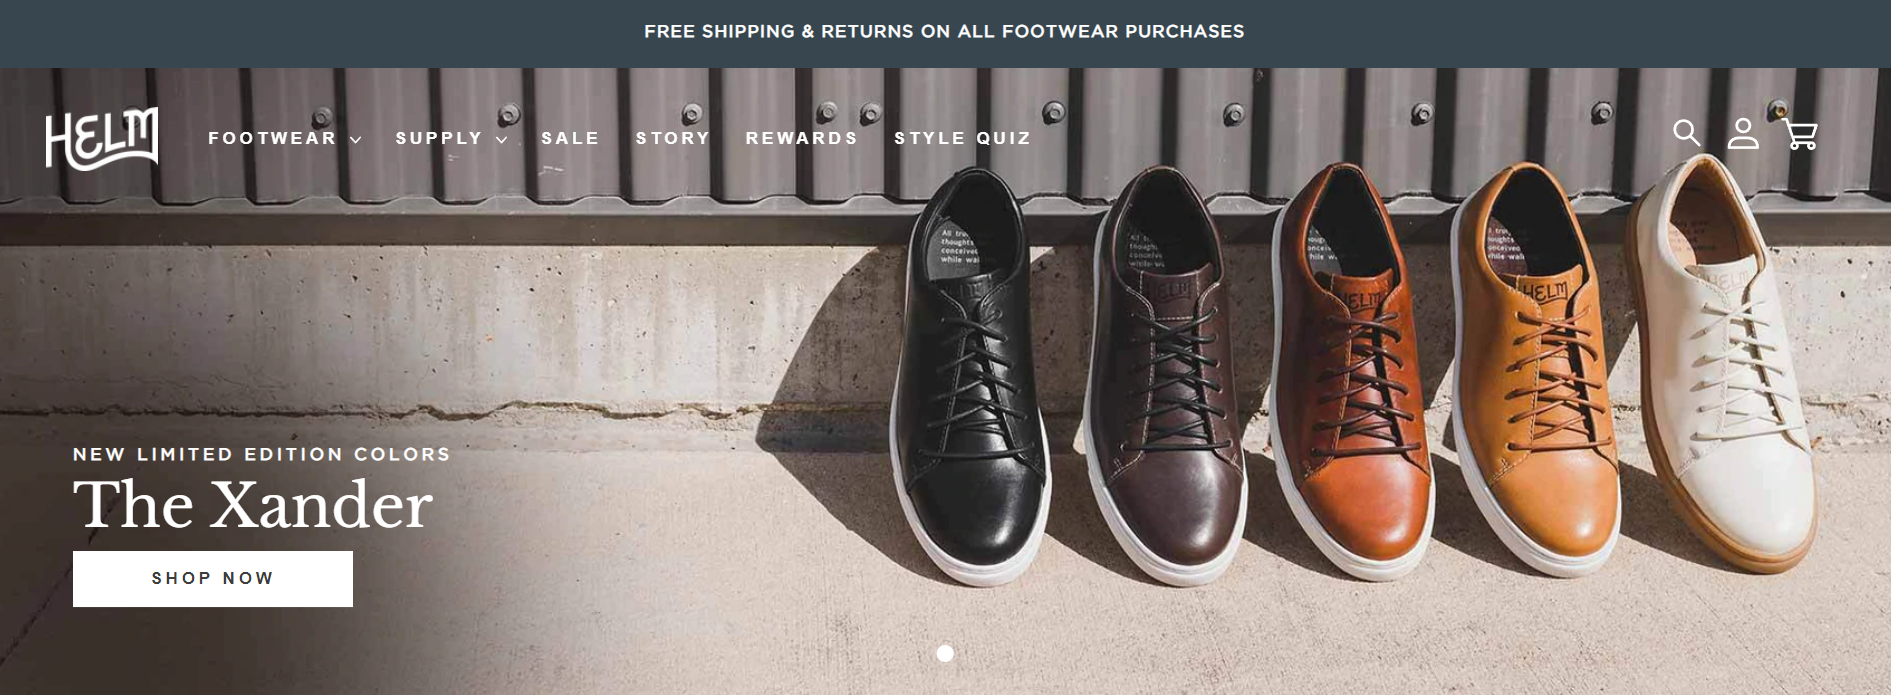 helm boots website on Shopify